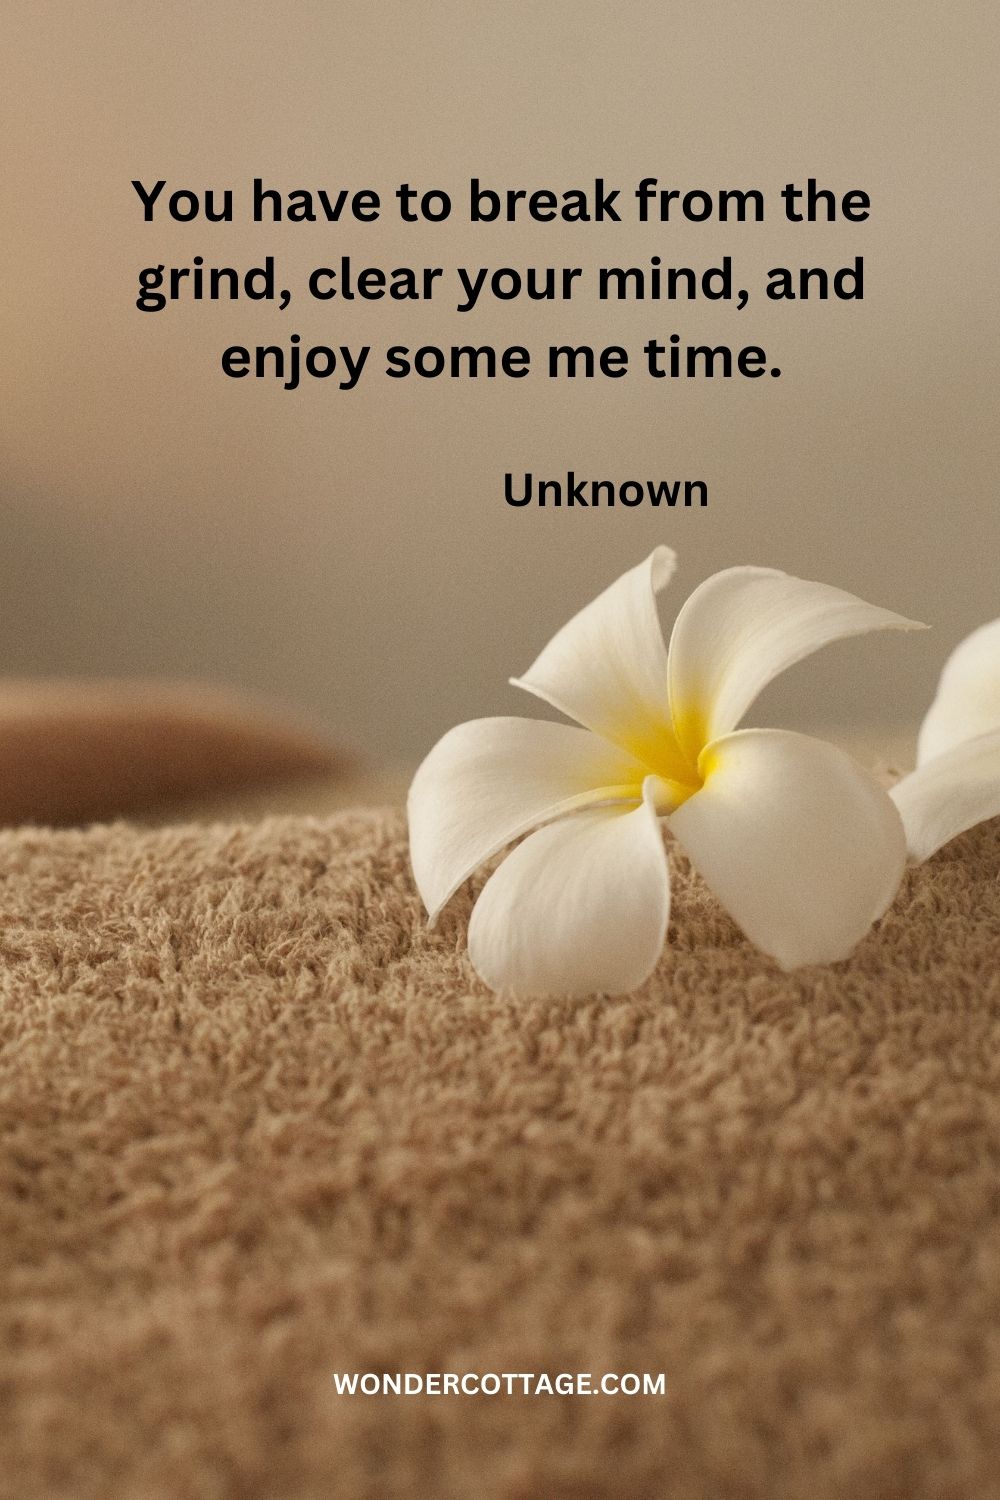 You have to break from the grind, clear your mind, and enjoy some me time. Unknown